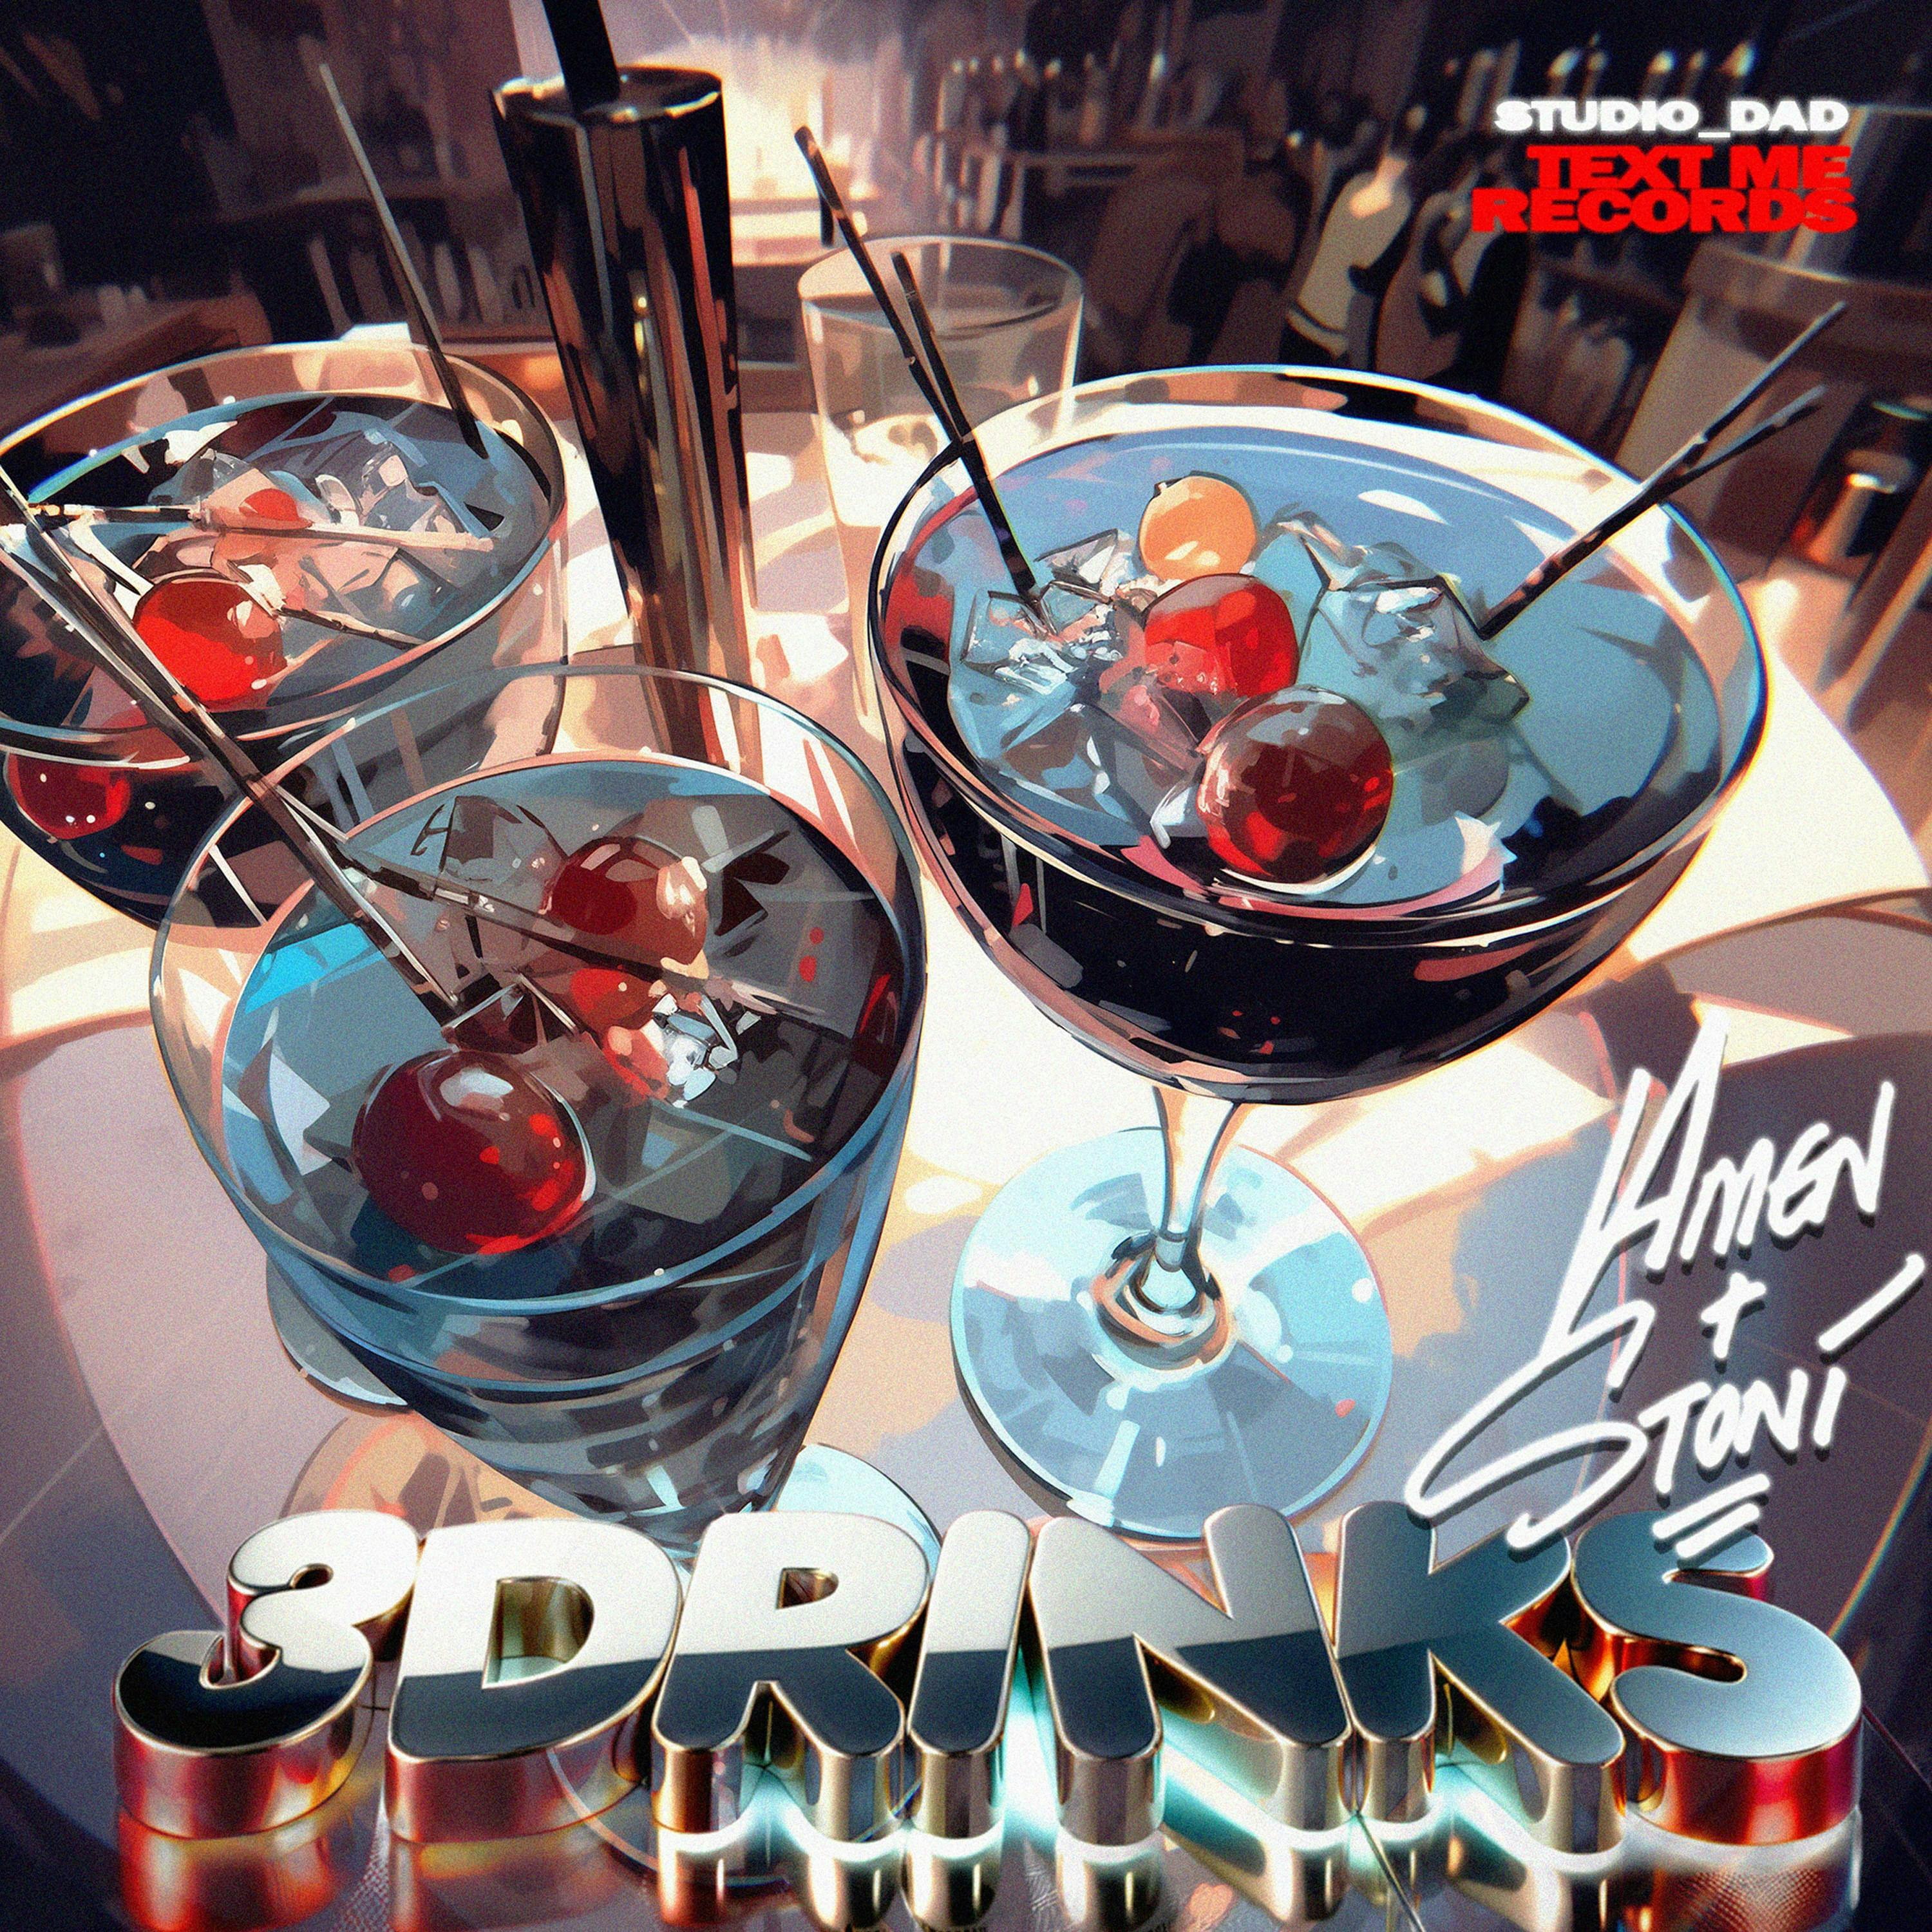 Cover art for Studio_Dad's song: 3Drinks - feat. Amen, Stoni